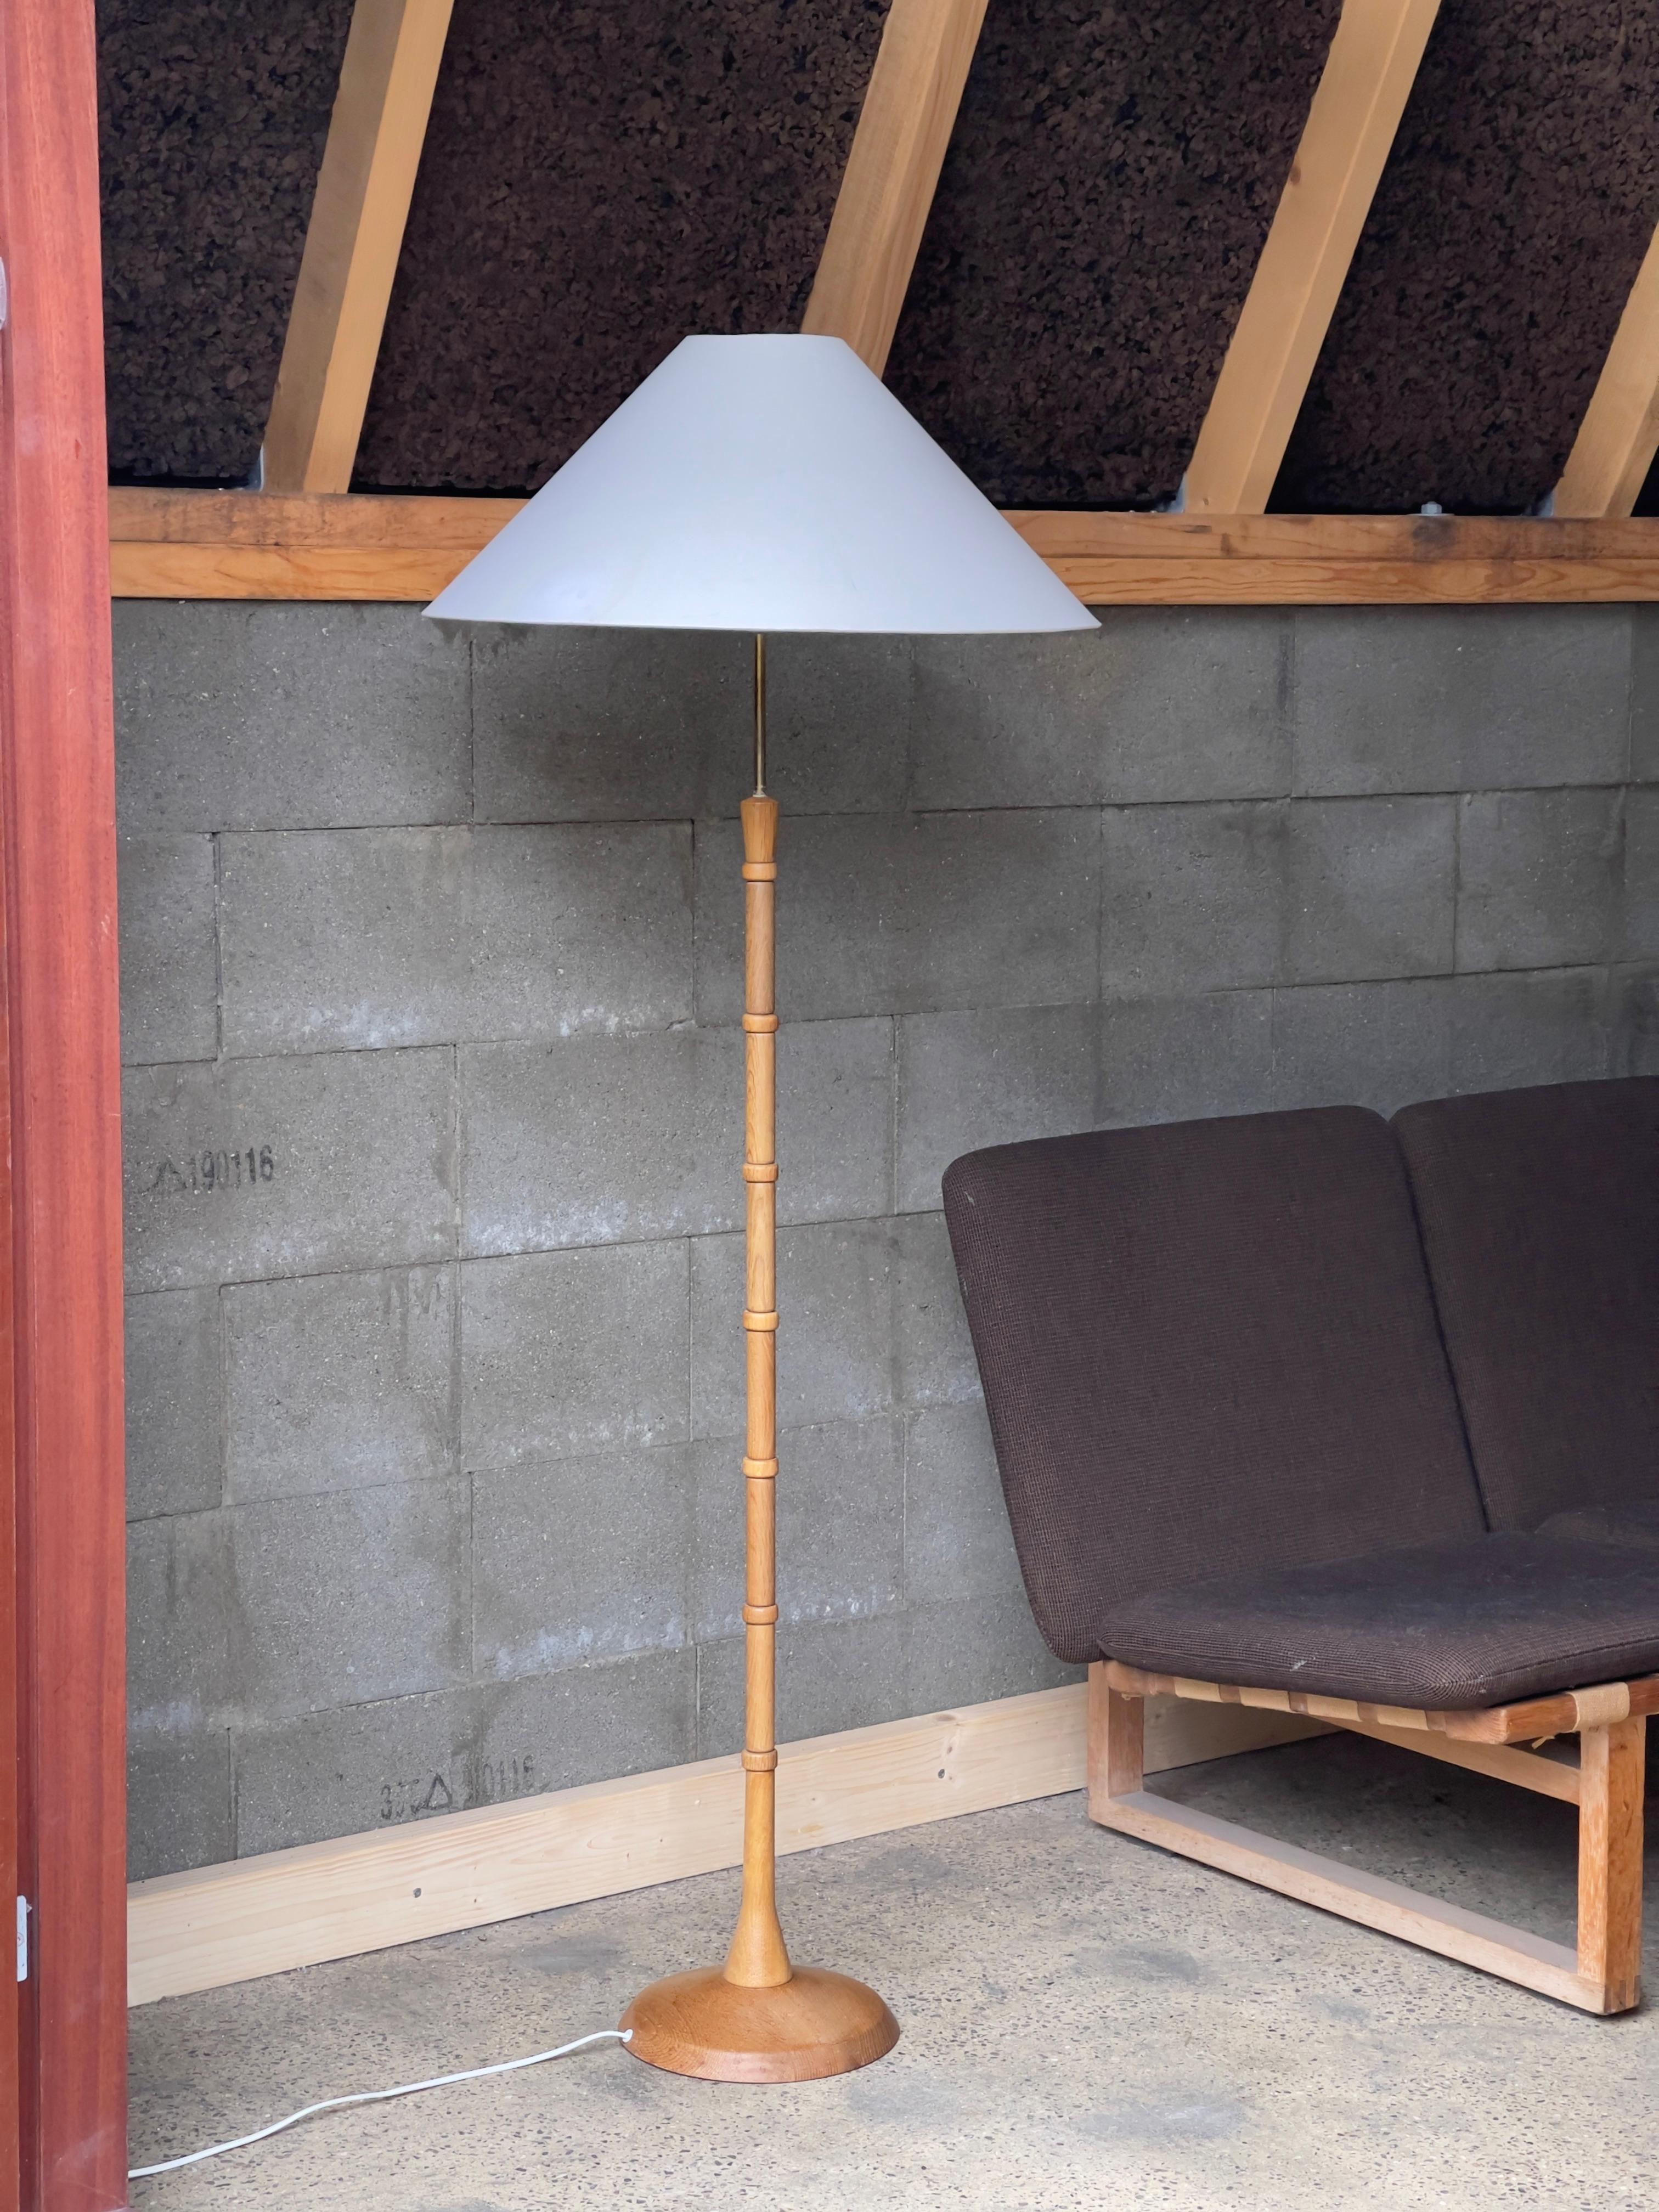 This rare Danish midcentury floor lamp from the 1960s stands as a testament to the exquisite craftsmanship and timeless elegance of Scandinavian design during that era. Crafted meticulously from solid oak and brass, its design epitomizes the fusion